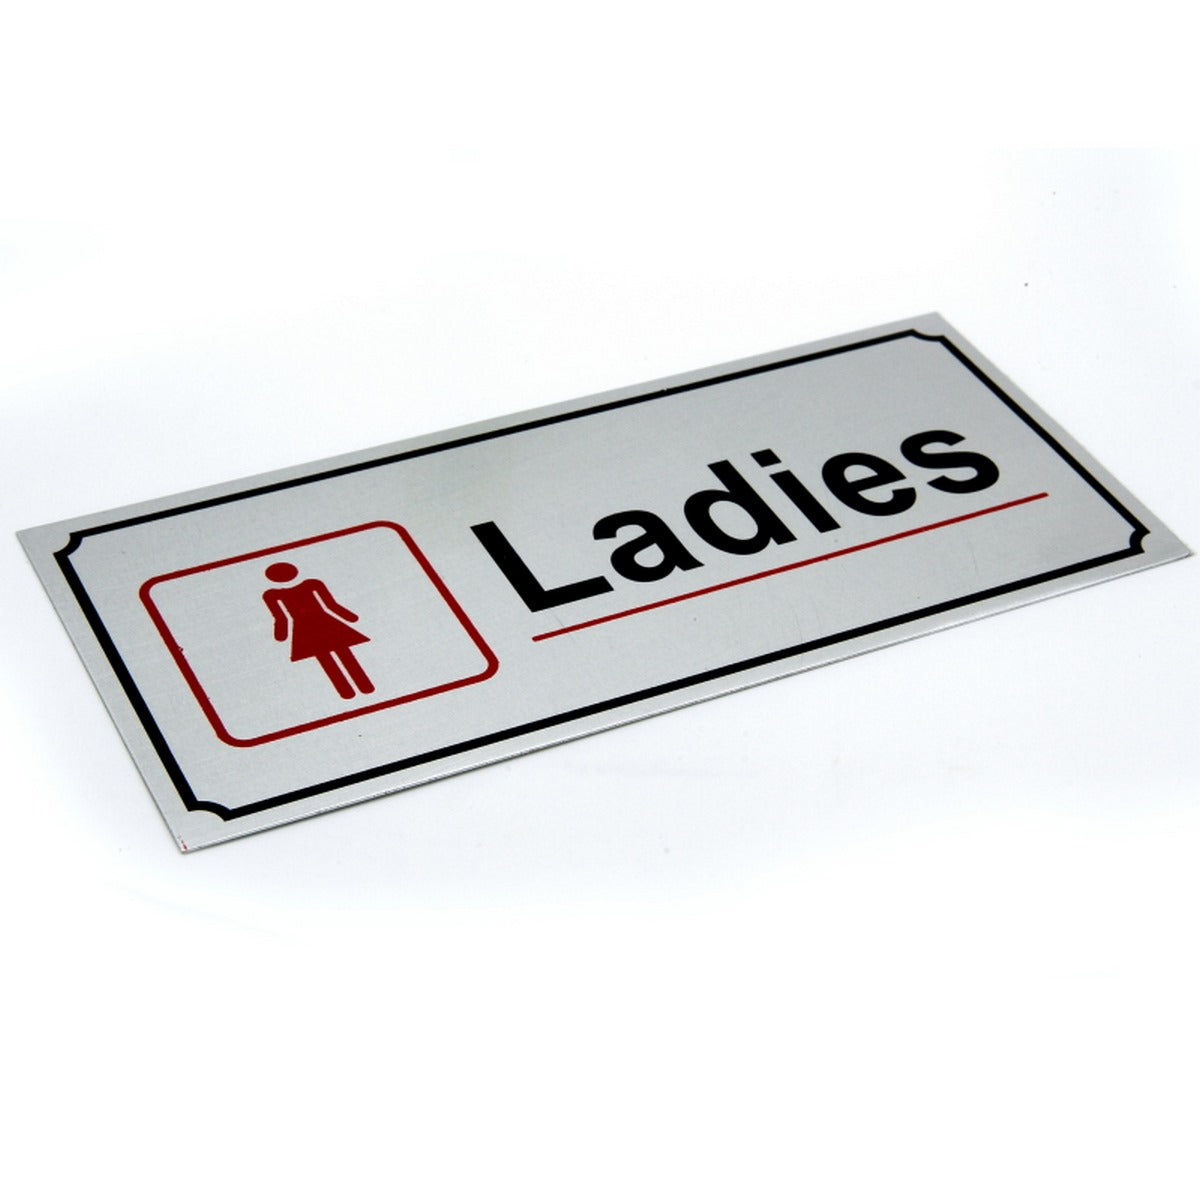 Gents toilet sign Cut Out Stock Images & Pictures - Alamy